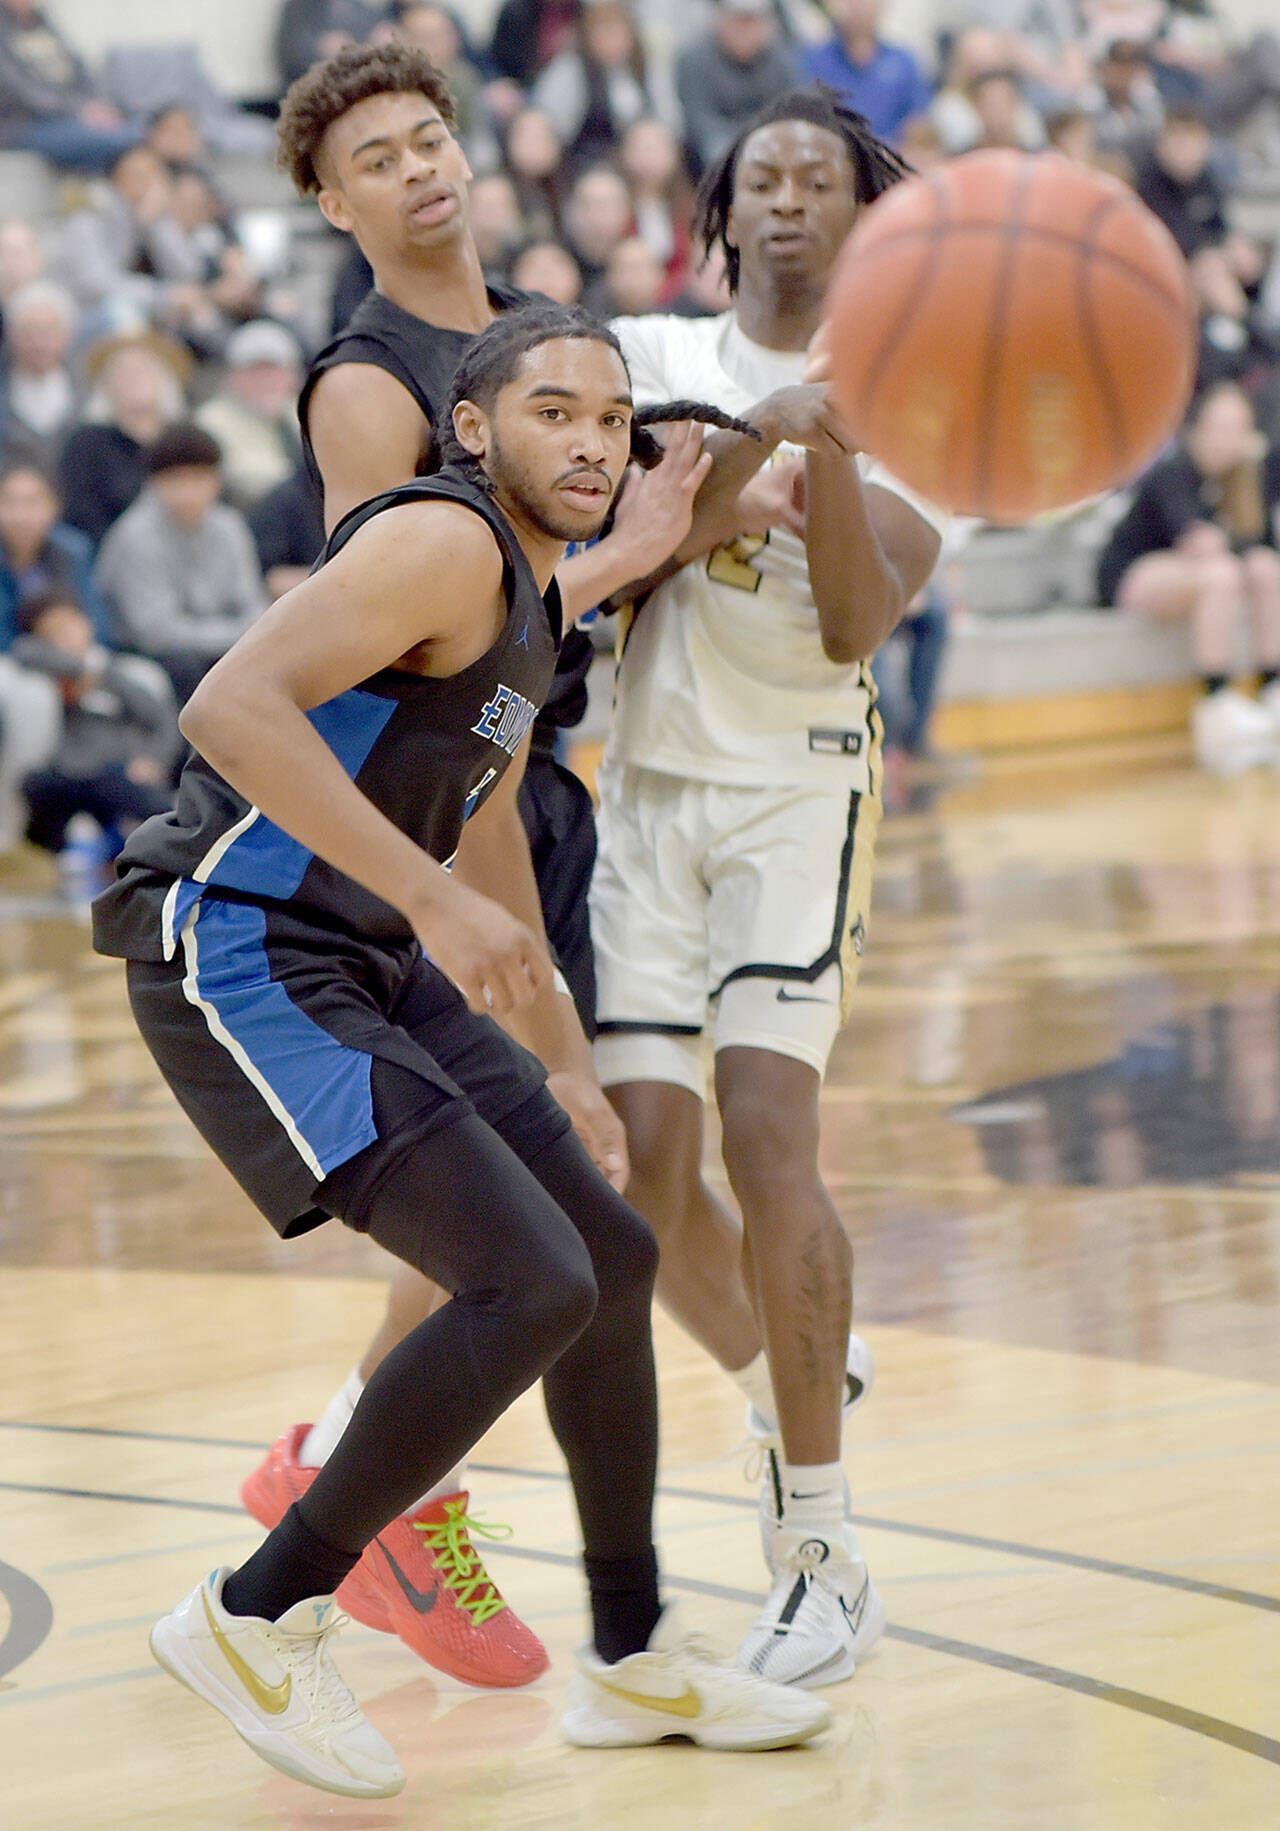 KEITH THORPE/PENINSULA DAILY NEWS 
Peninsula's Ese Onakpoma, right, and Edmonds' Chris Lee, left, and Trevon Hamilton watch an errant ball on Saturday at Peninsula College.